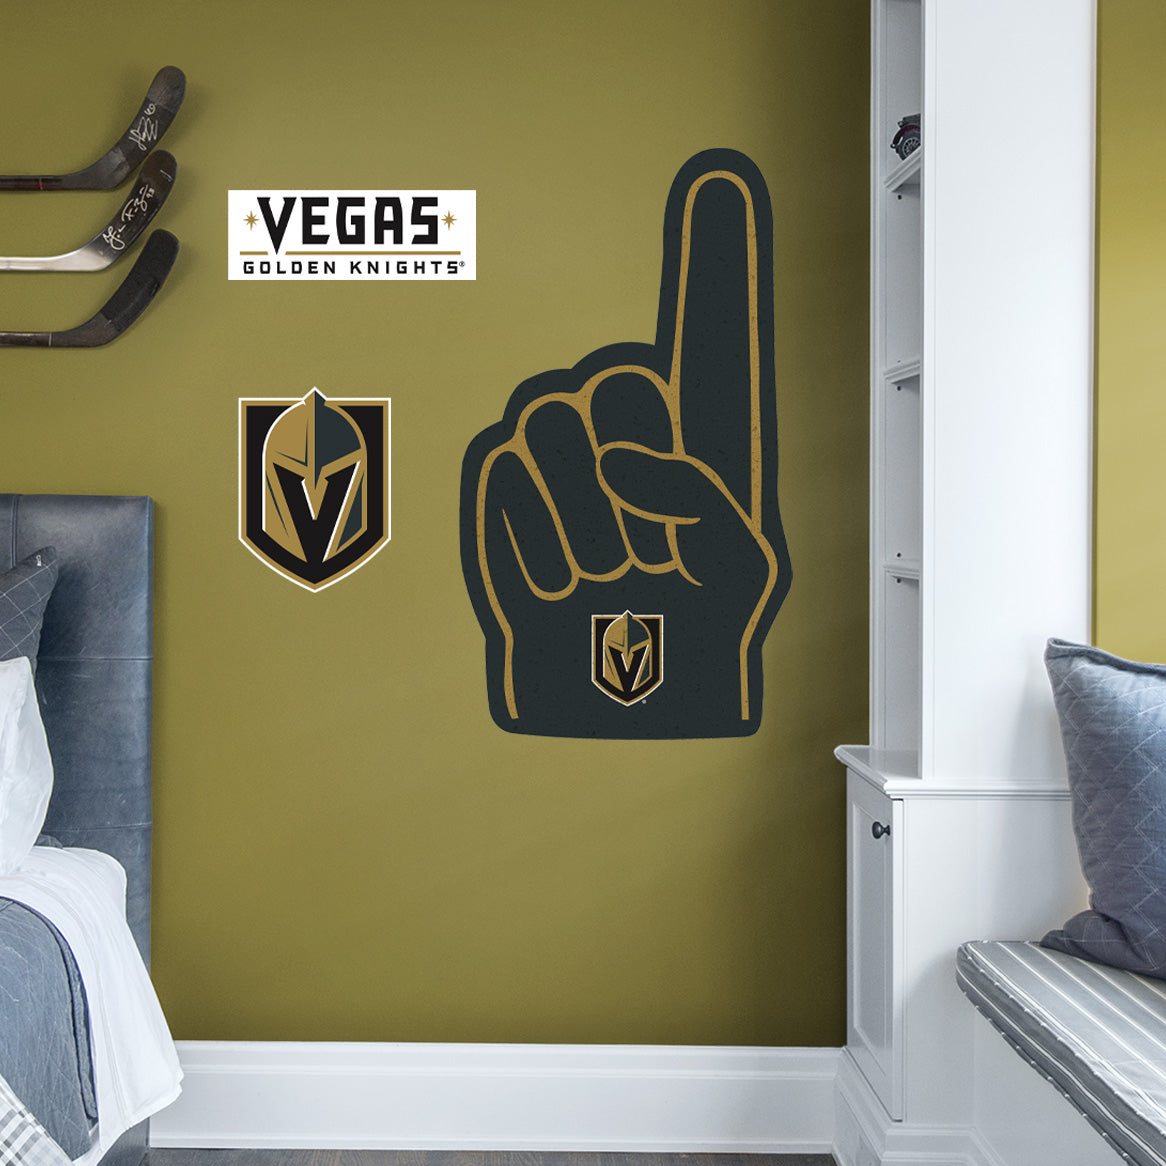 Vegas Golden Knights on X: Throwing it back to last year's